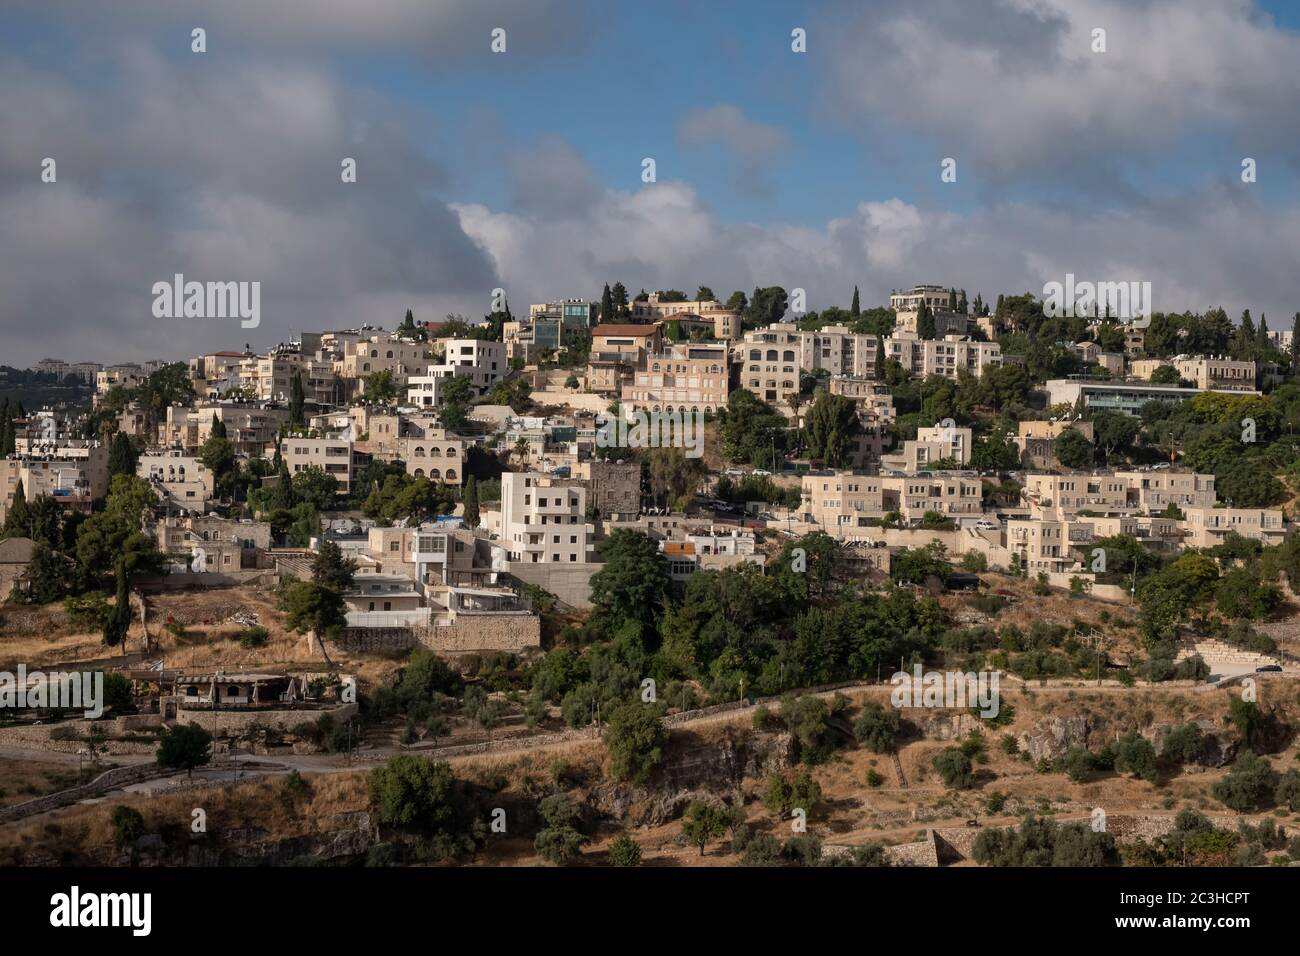 View of Abu Tor a mixed Jewish and Arab neighborhood located over valley of Hinnom the modern name for the biblical Gehenna or Gehinnom valley surrounding Jerusalem's Old City, Israel Stock Photo